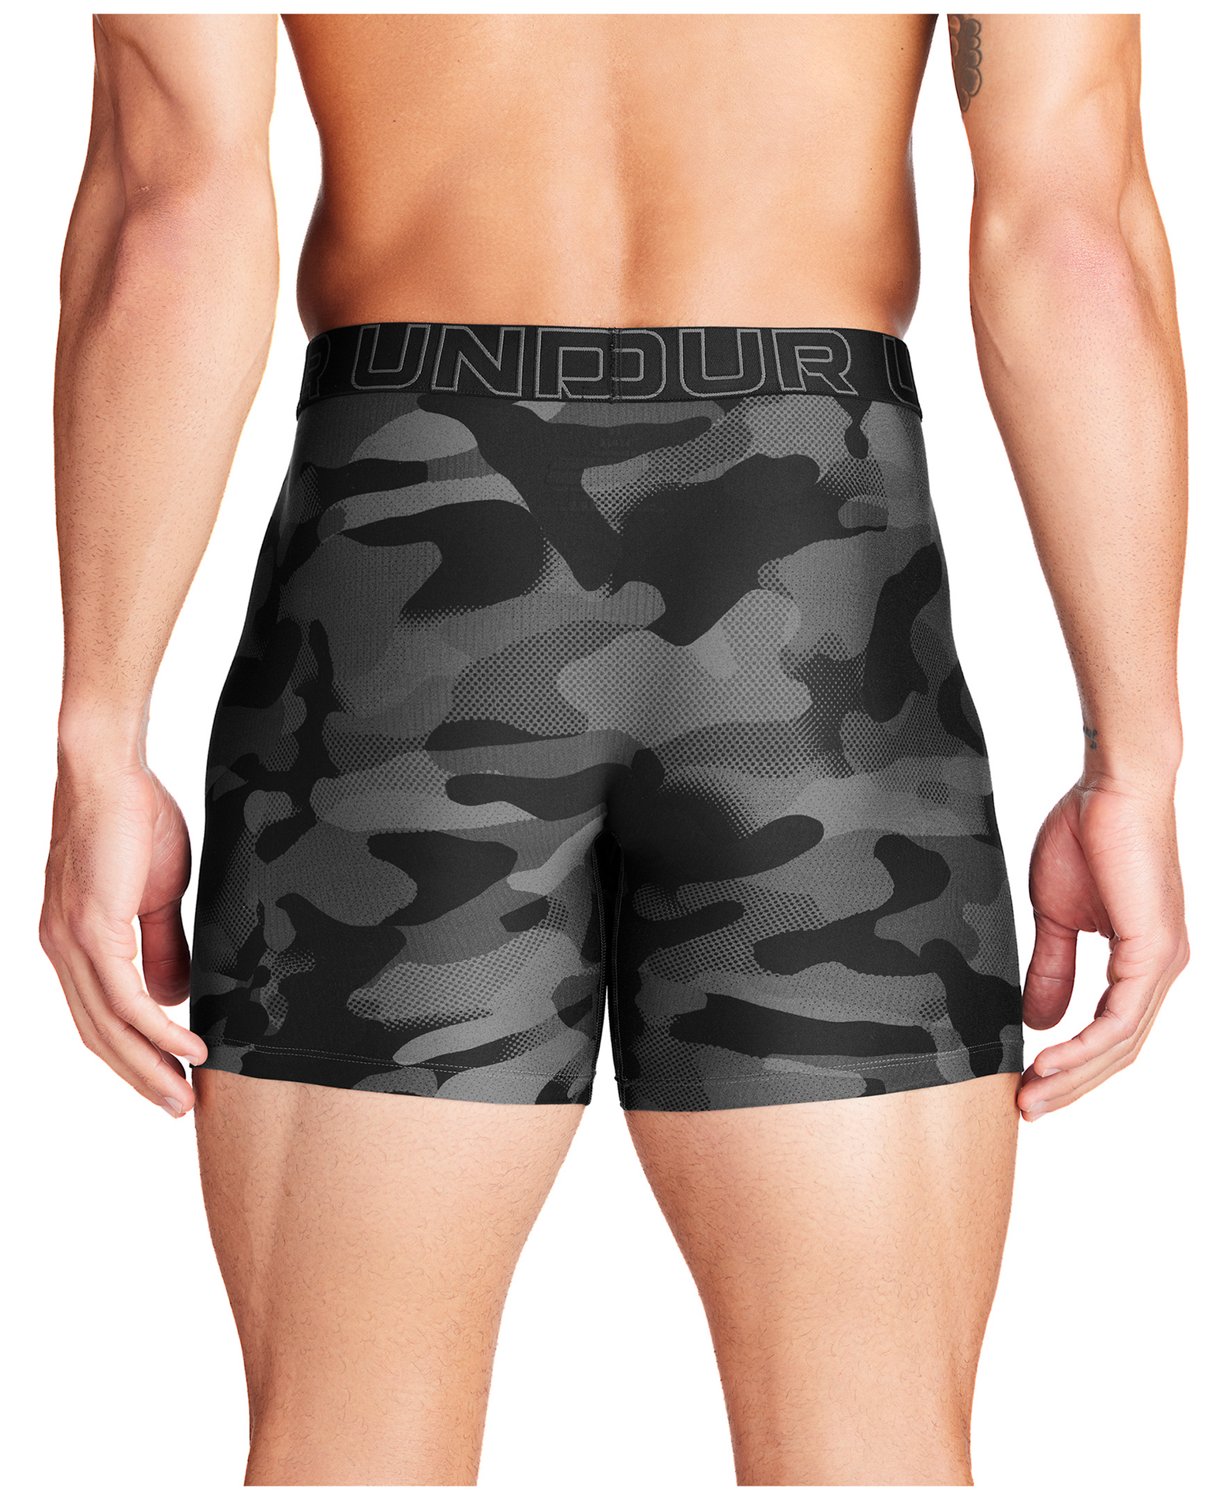 Under Armour Mens Tech 6 Inch 2 Pack Boxers - Black